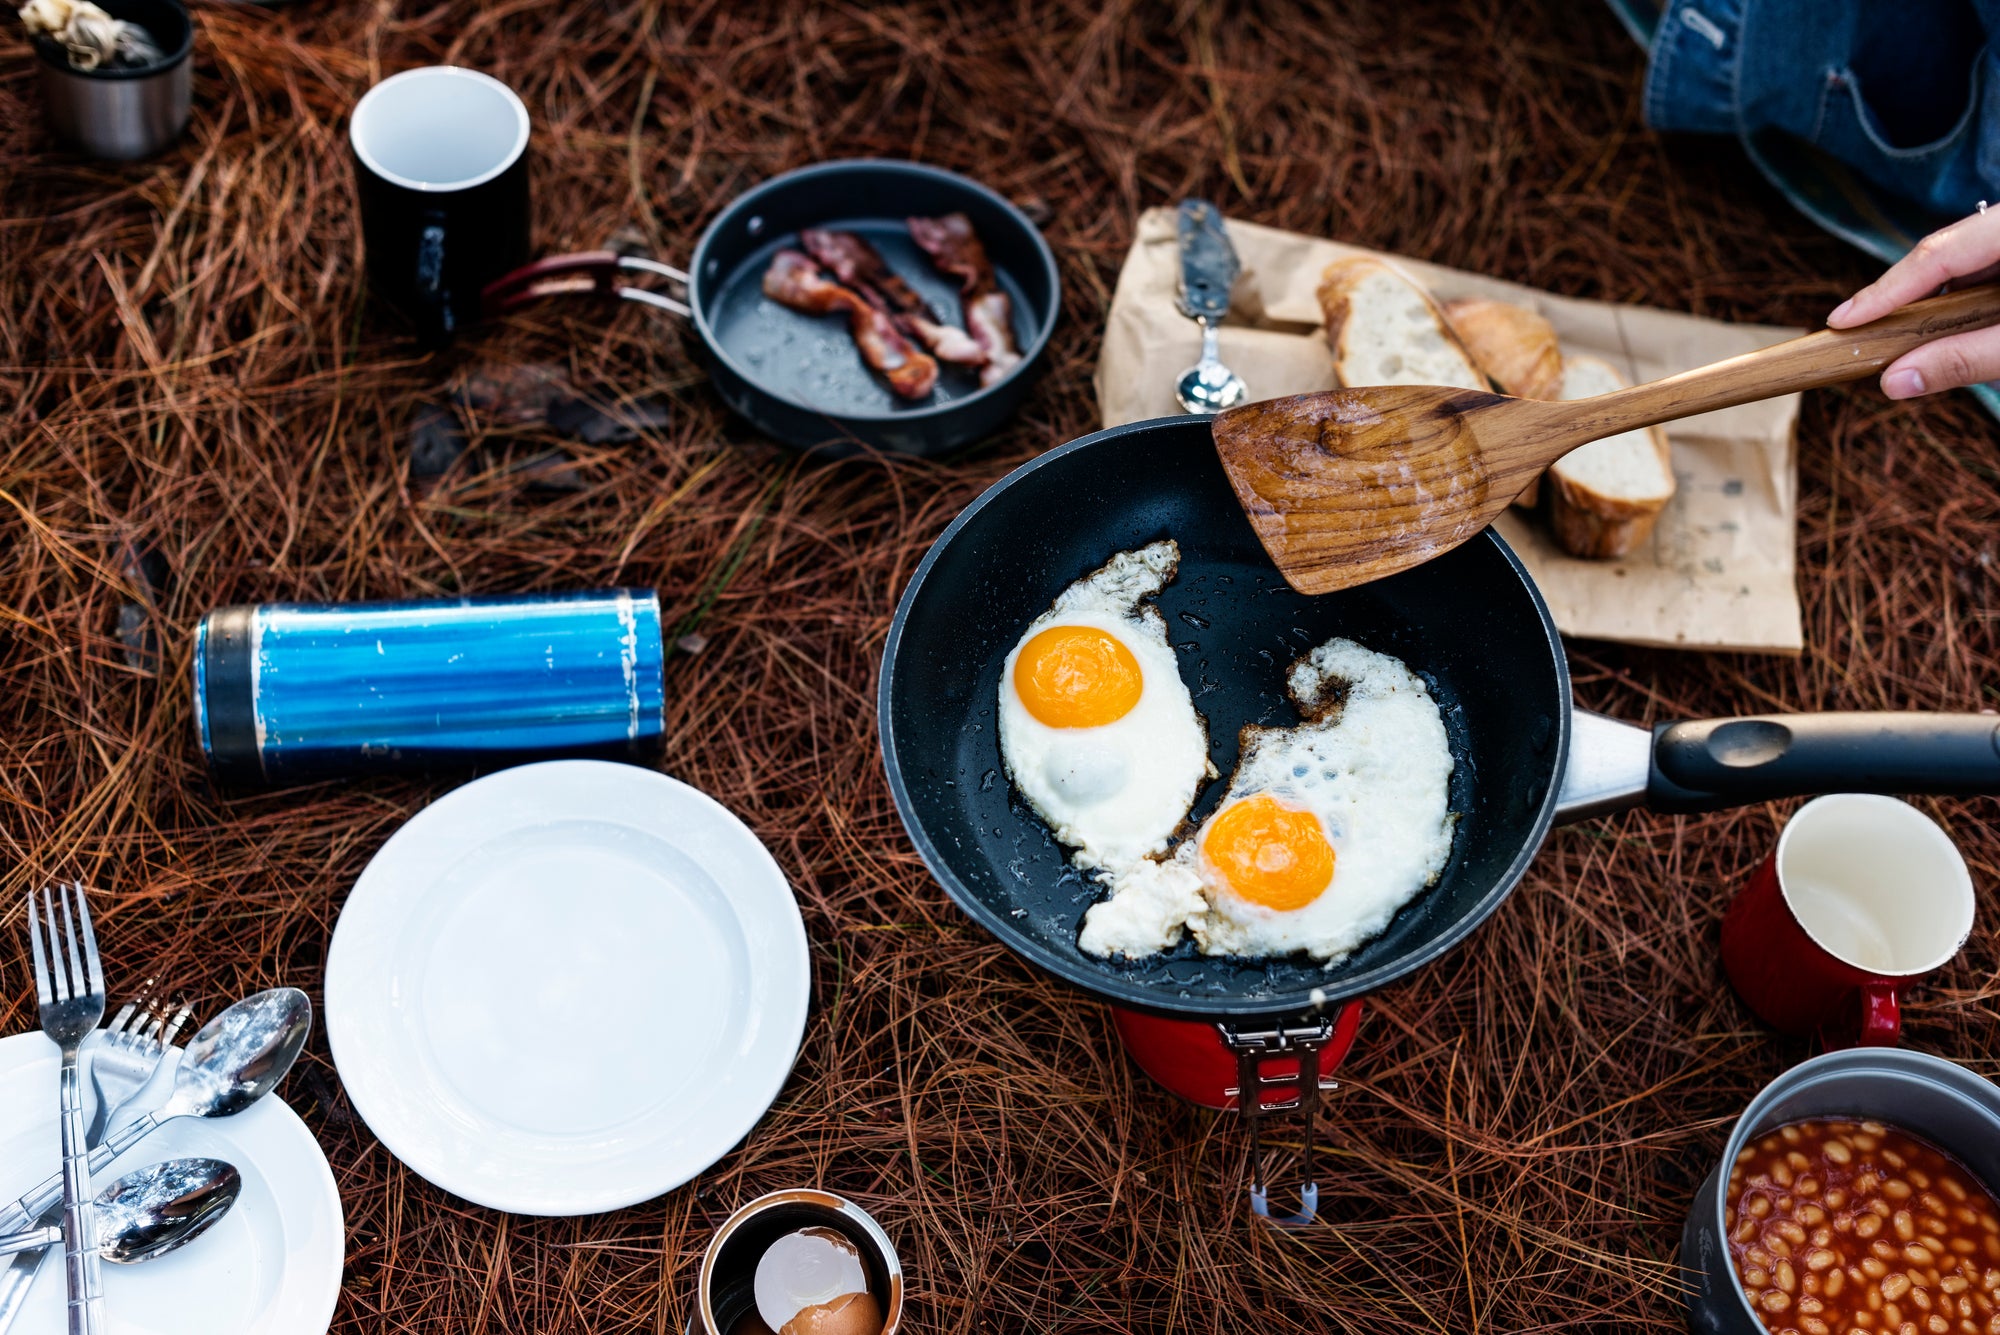 Simple And Tasty No-Cook Camping Meal Ideas